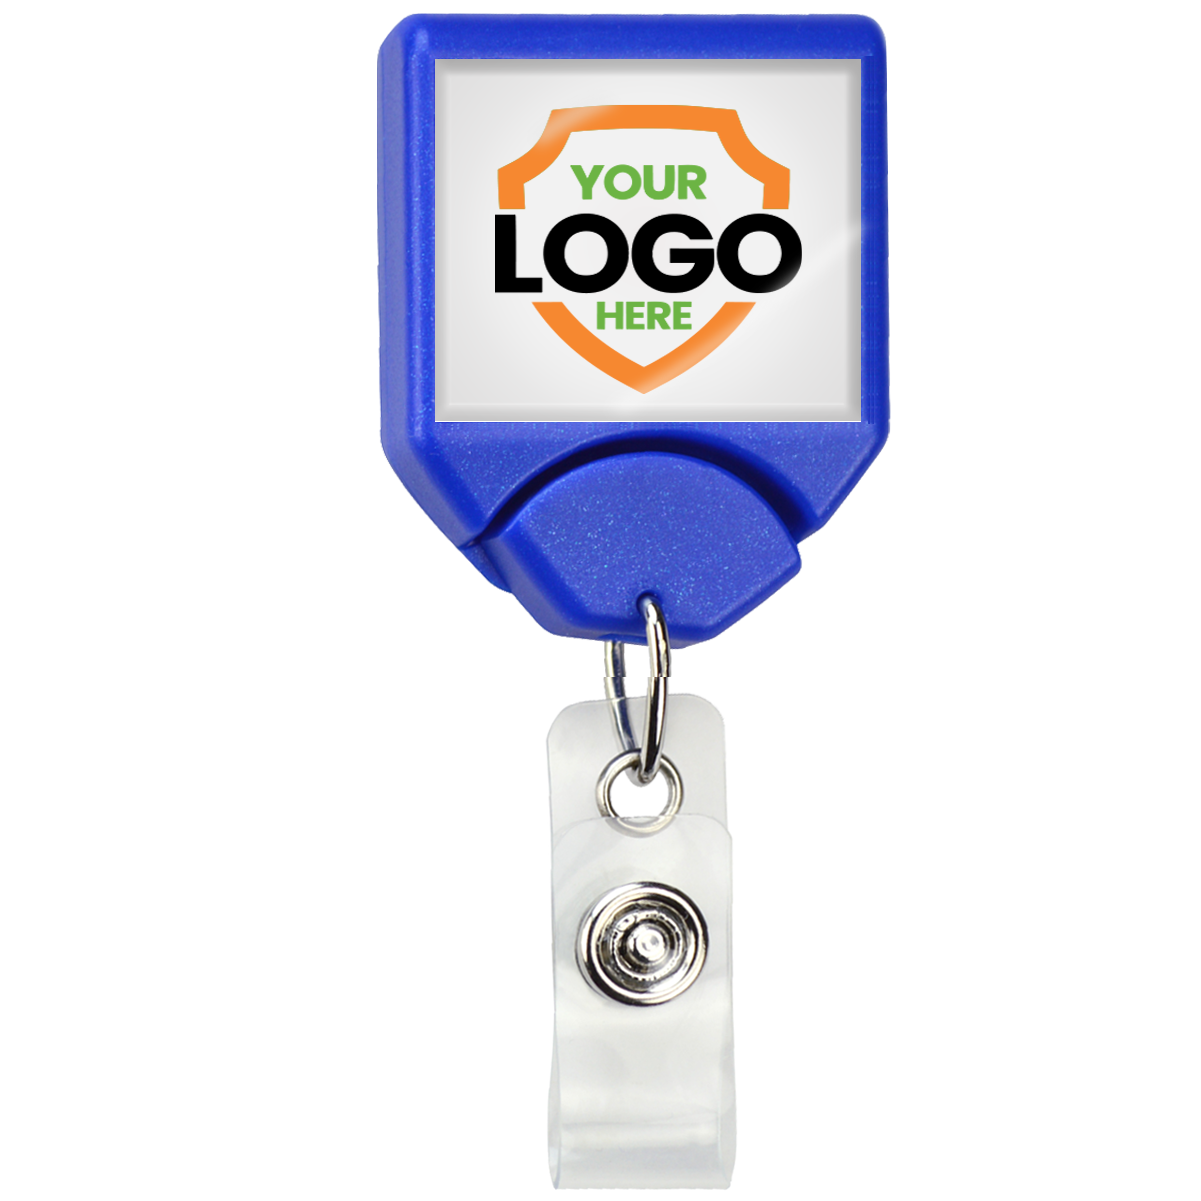 Customize Your Retractable B-Reel Badge Holder